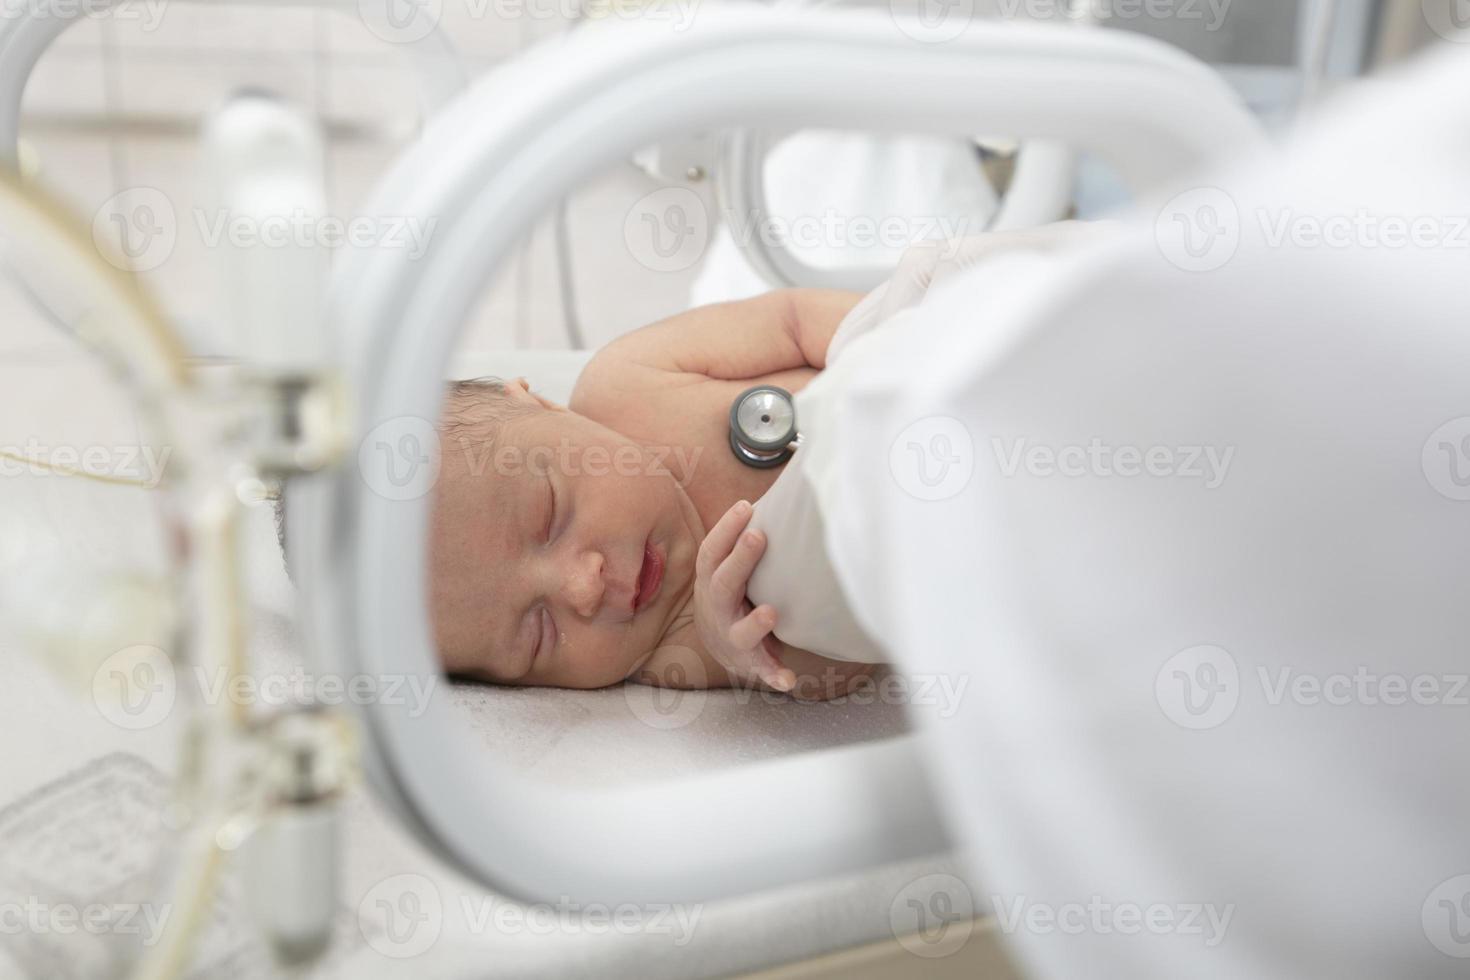 A newborn baby lies in boxes in the hospital. A child in an incubator. Neonatal and Premature Intensive Care Unit photo